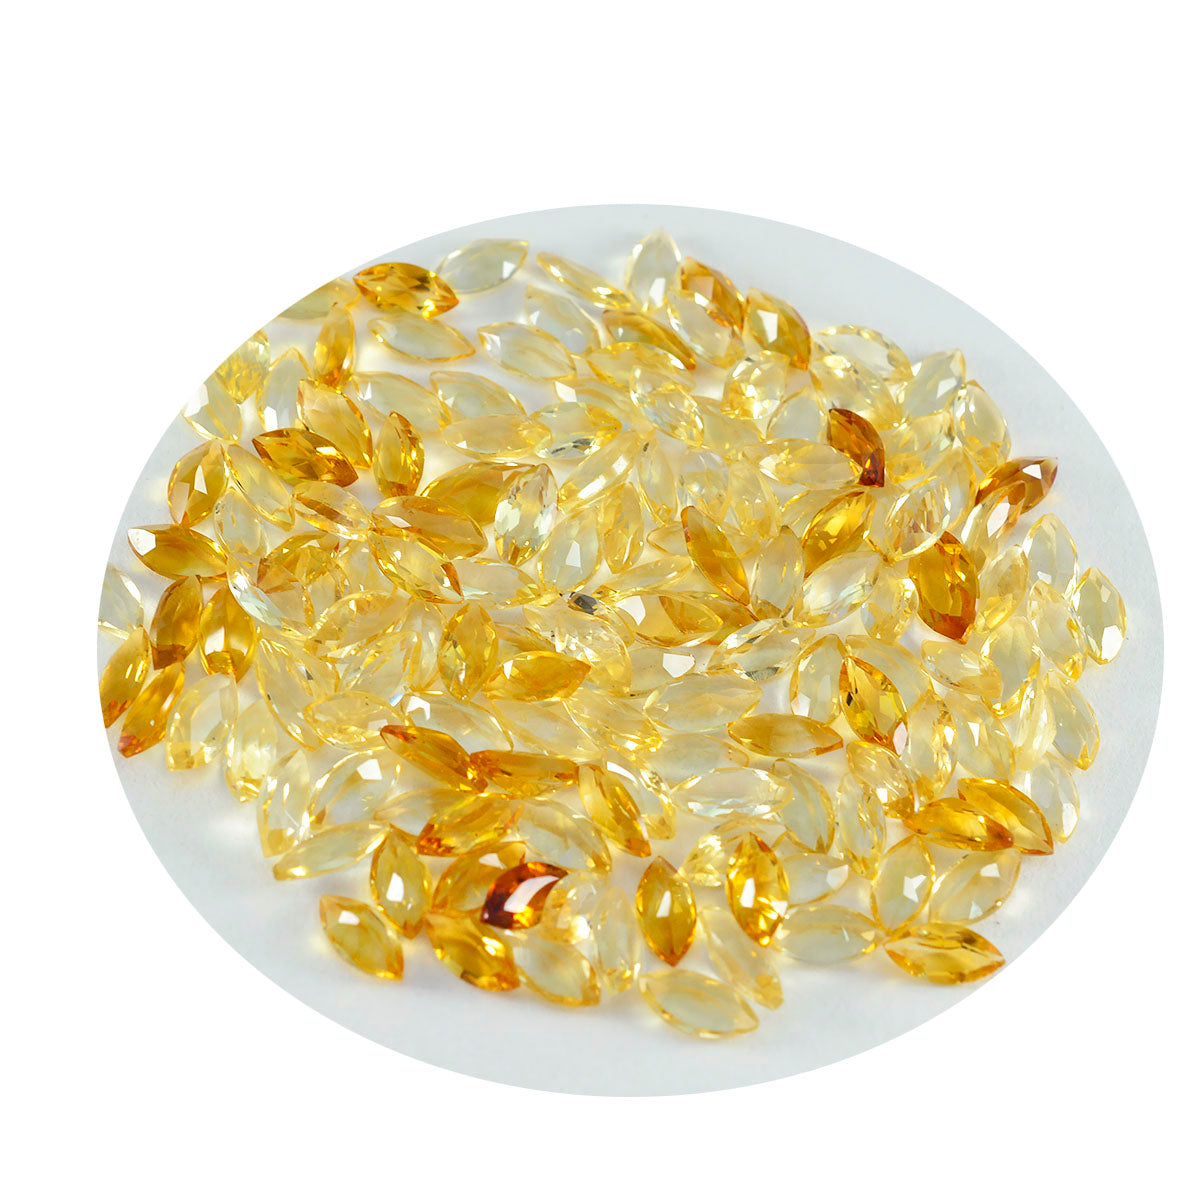 Riyogems 1PC Natural Yellow Citrine Faceted 3x6 mm Marquise Shape cute Quality Loose Gem